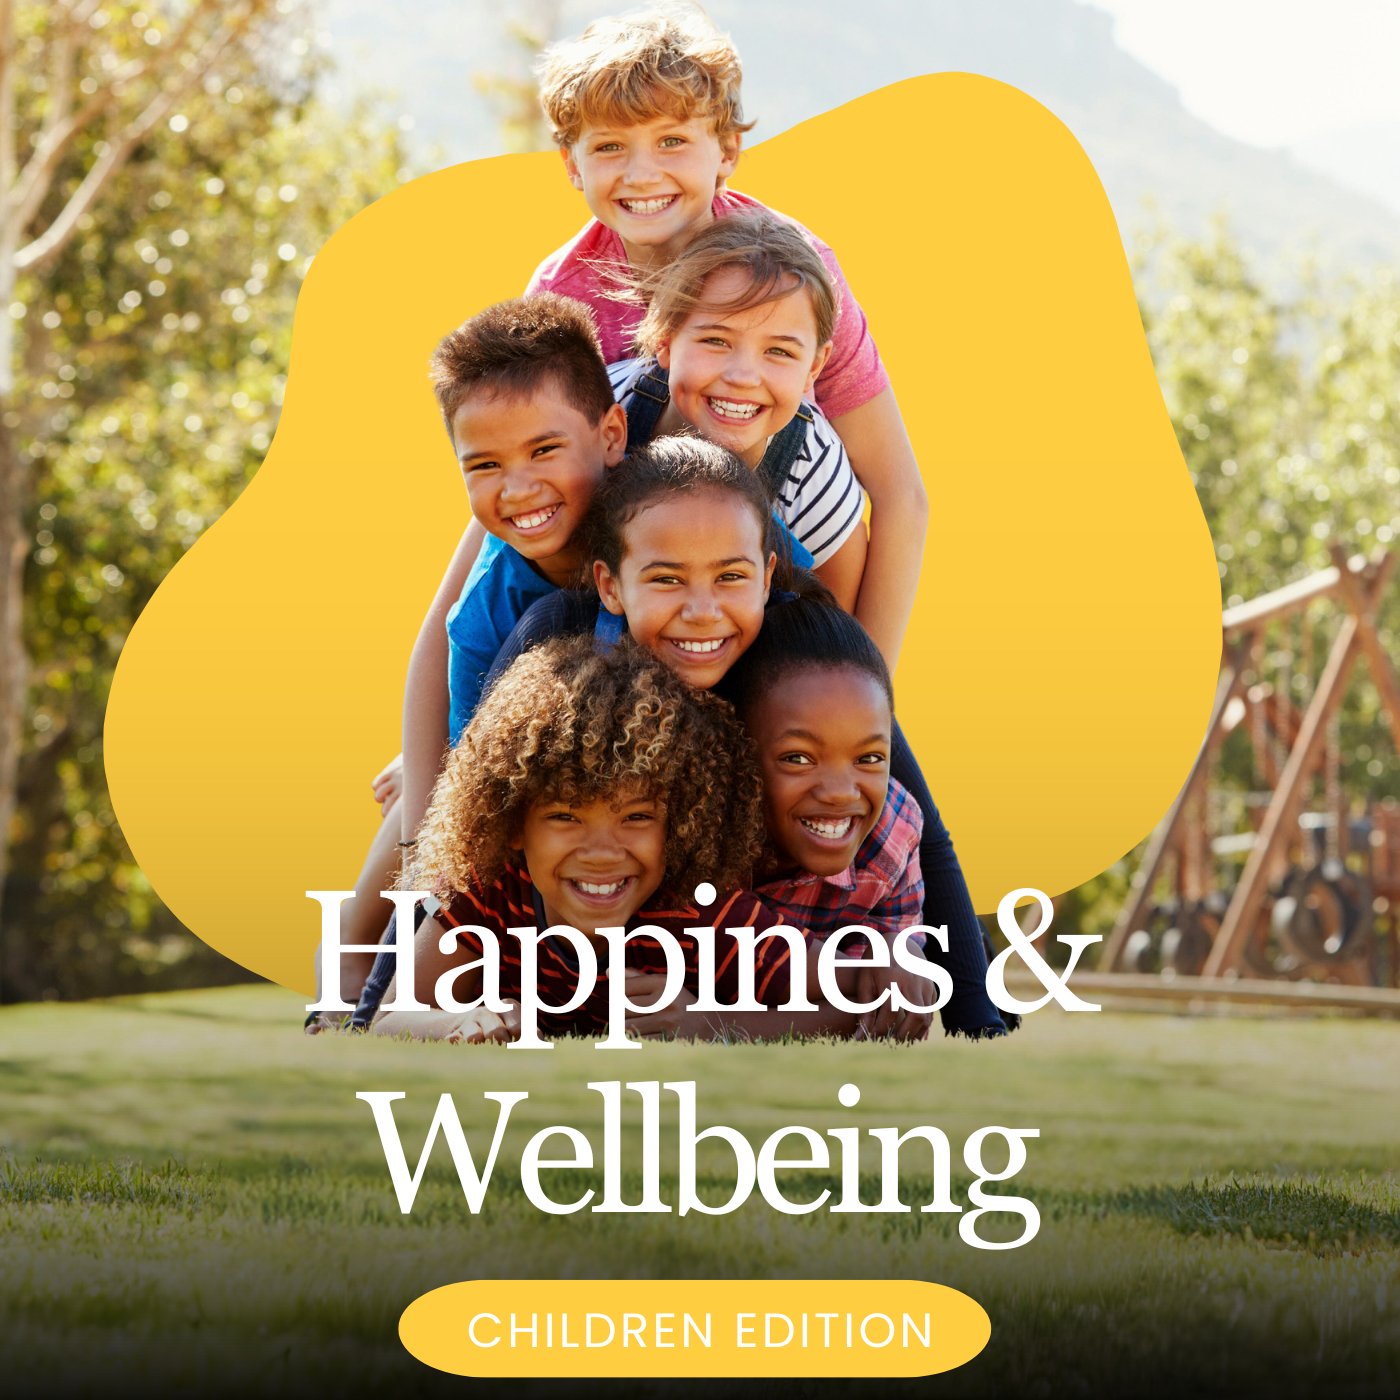 Children's Wellbeing Essentials Package Hypnotherapy (10 Sessions) - Clearmindshypnotherapy